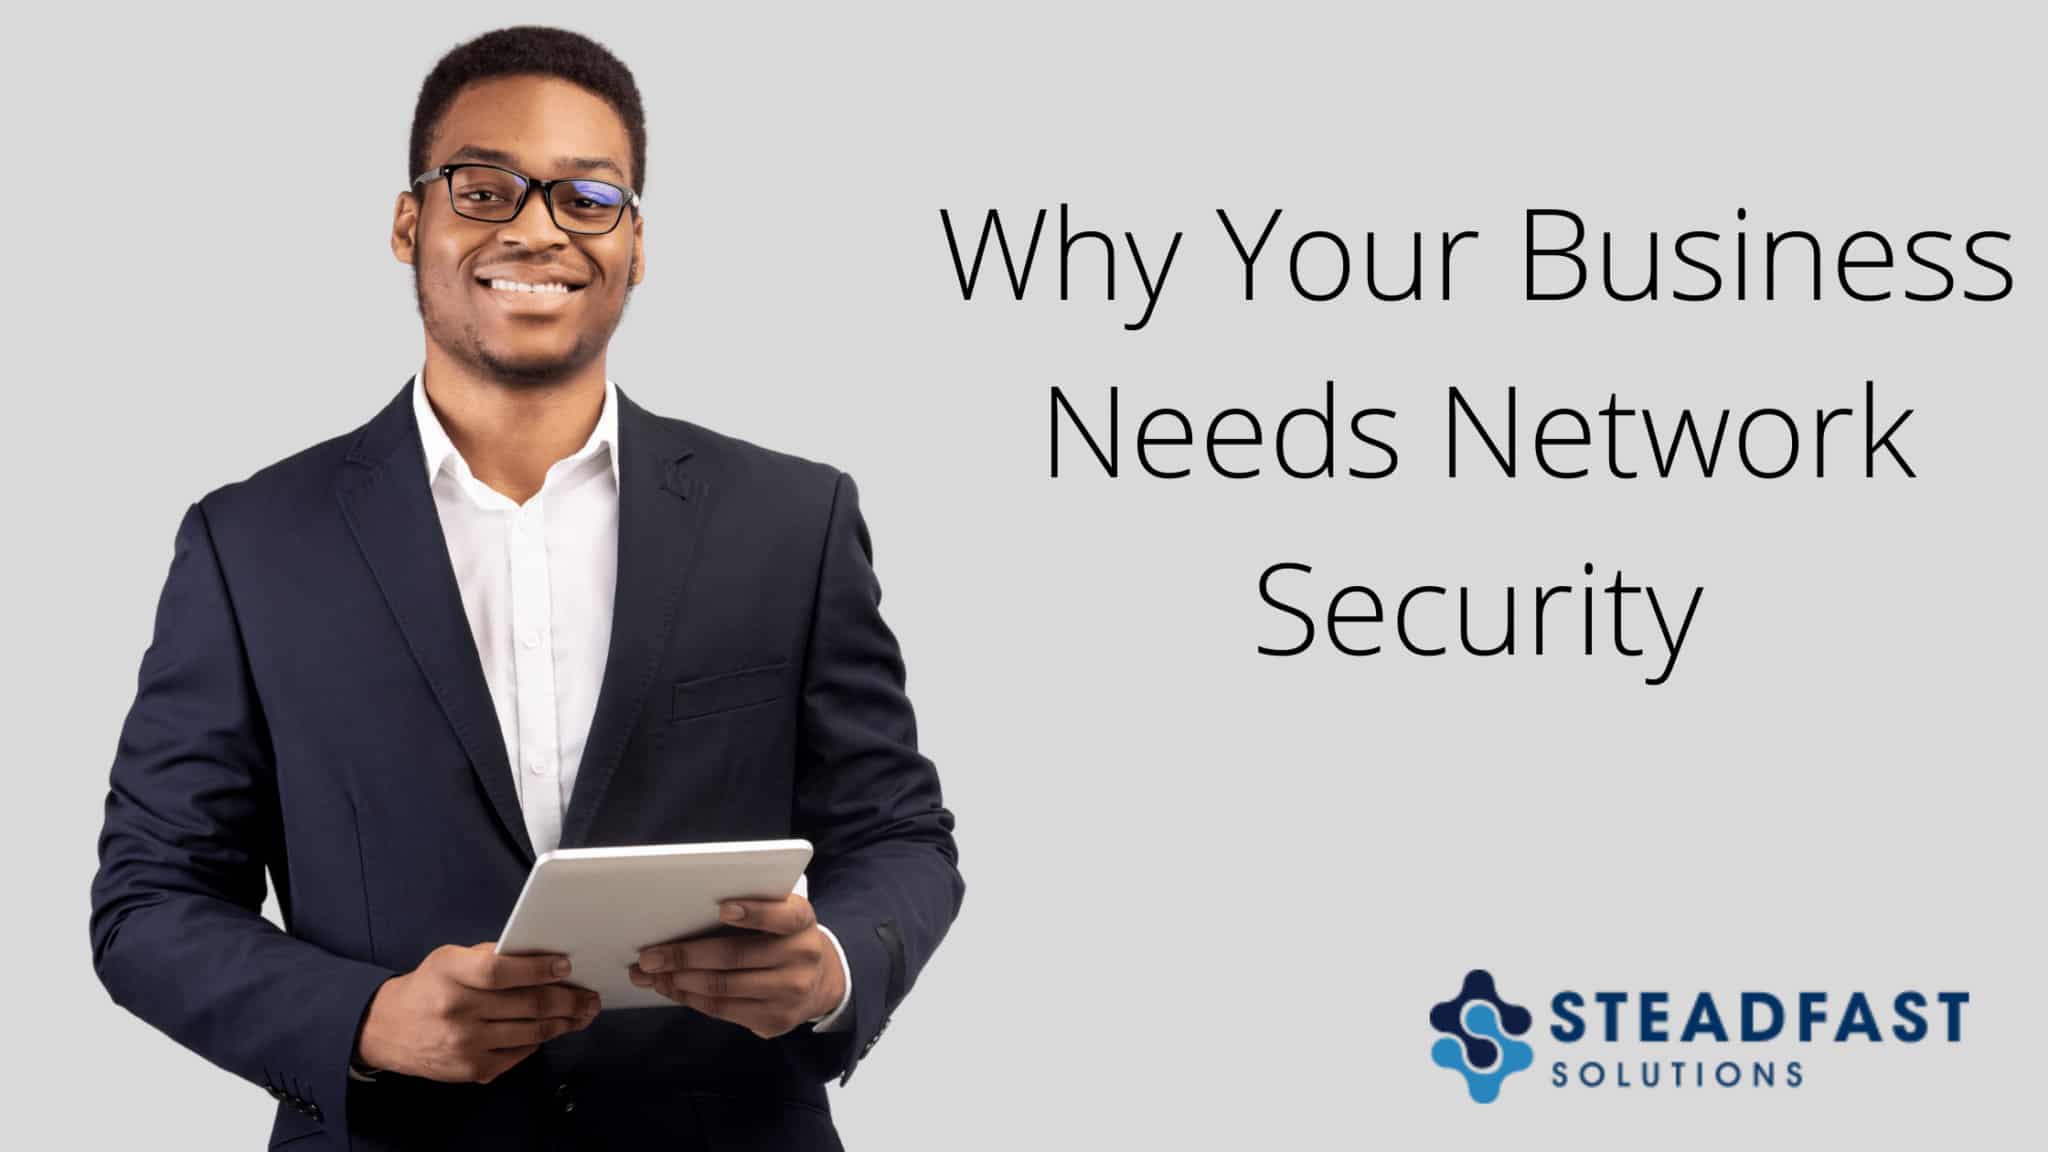 Why Your Business Needs Network Security